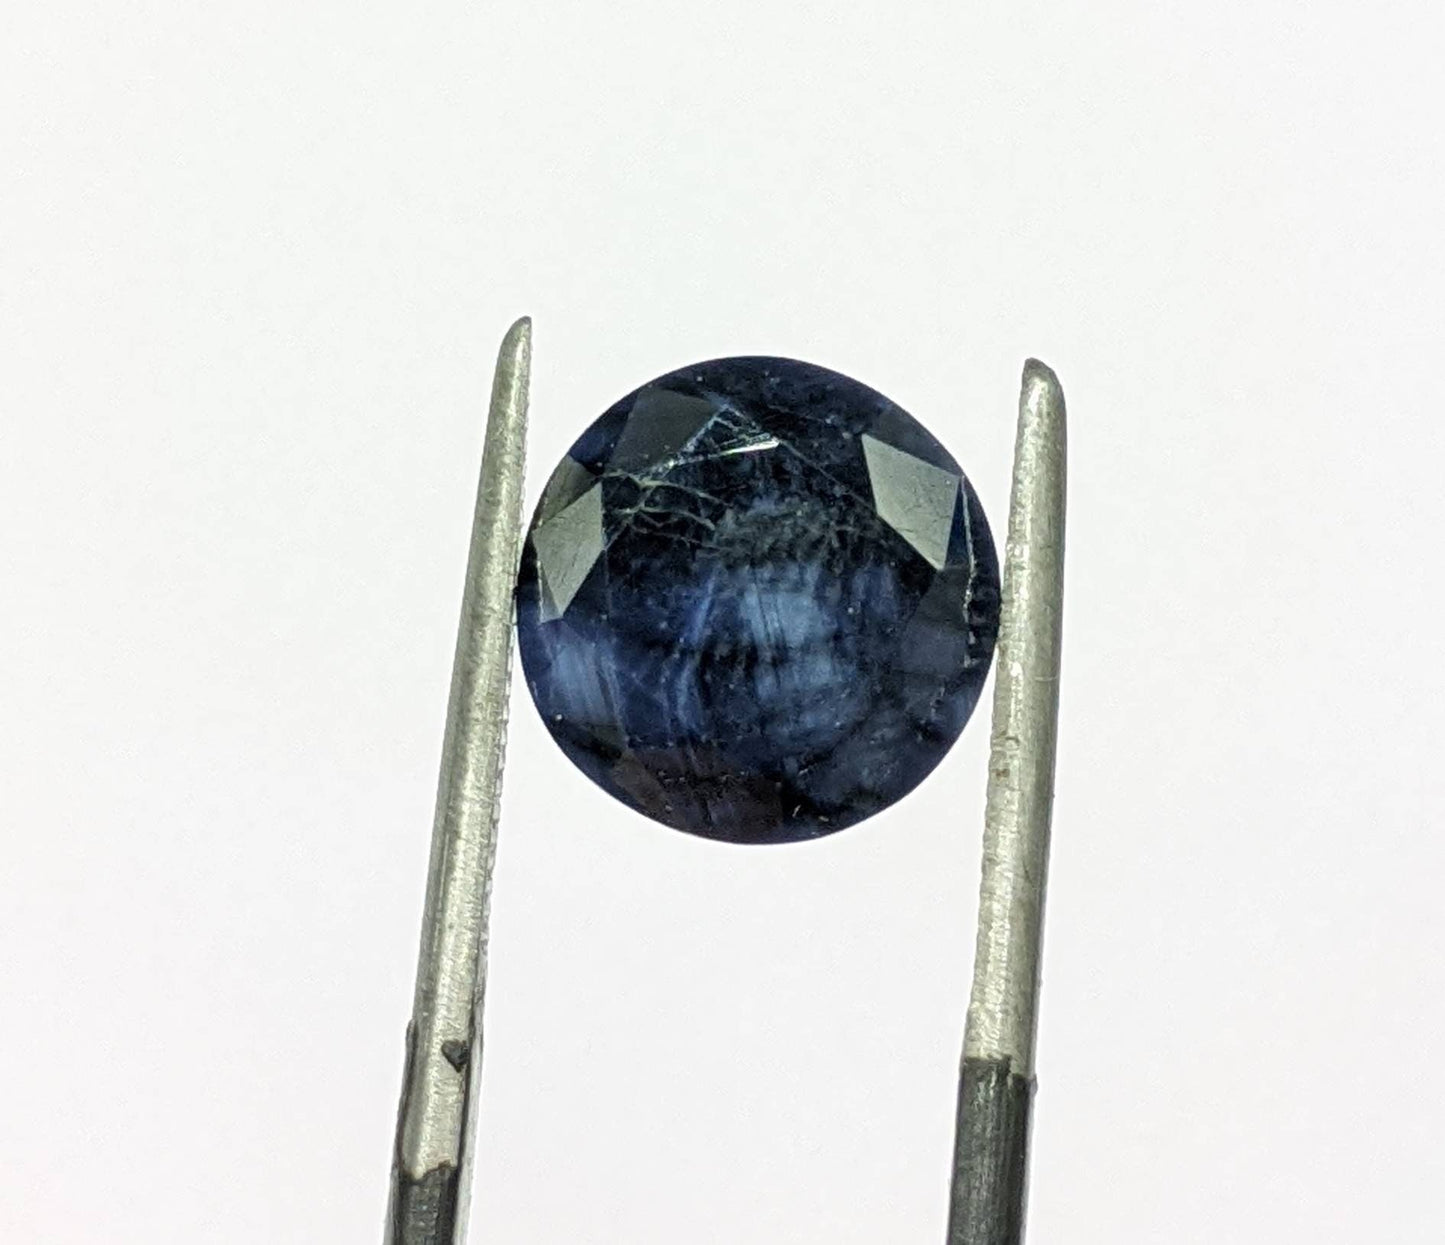 ARSAA GEMS AND MINERALSDark blue Sapphire faceted round cut shape from Badakhshan Afghanistan, 4.5 carats - Premium  from ARSAA GEMS AND MINERALS - Just $35.00! Shop now at ARSAA GEMS AND MINERALS